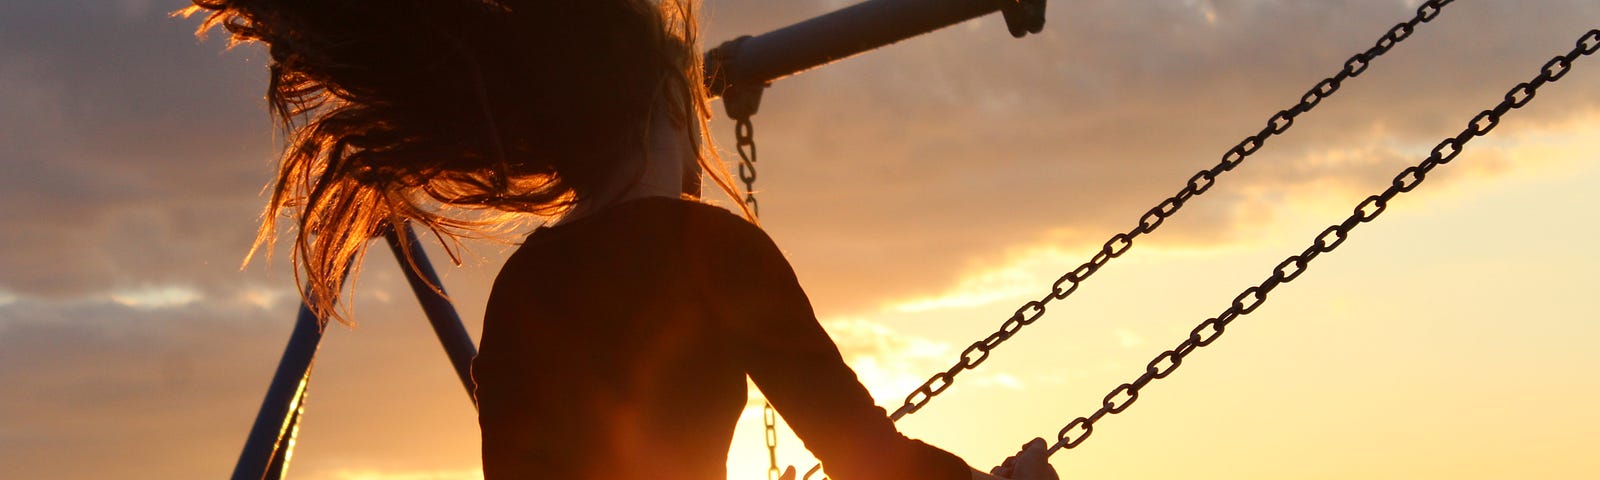 A lady on the swings at sunset.